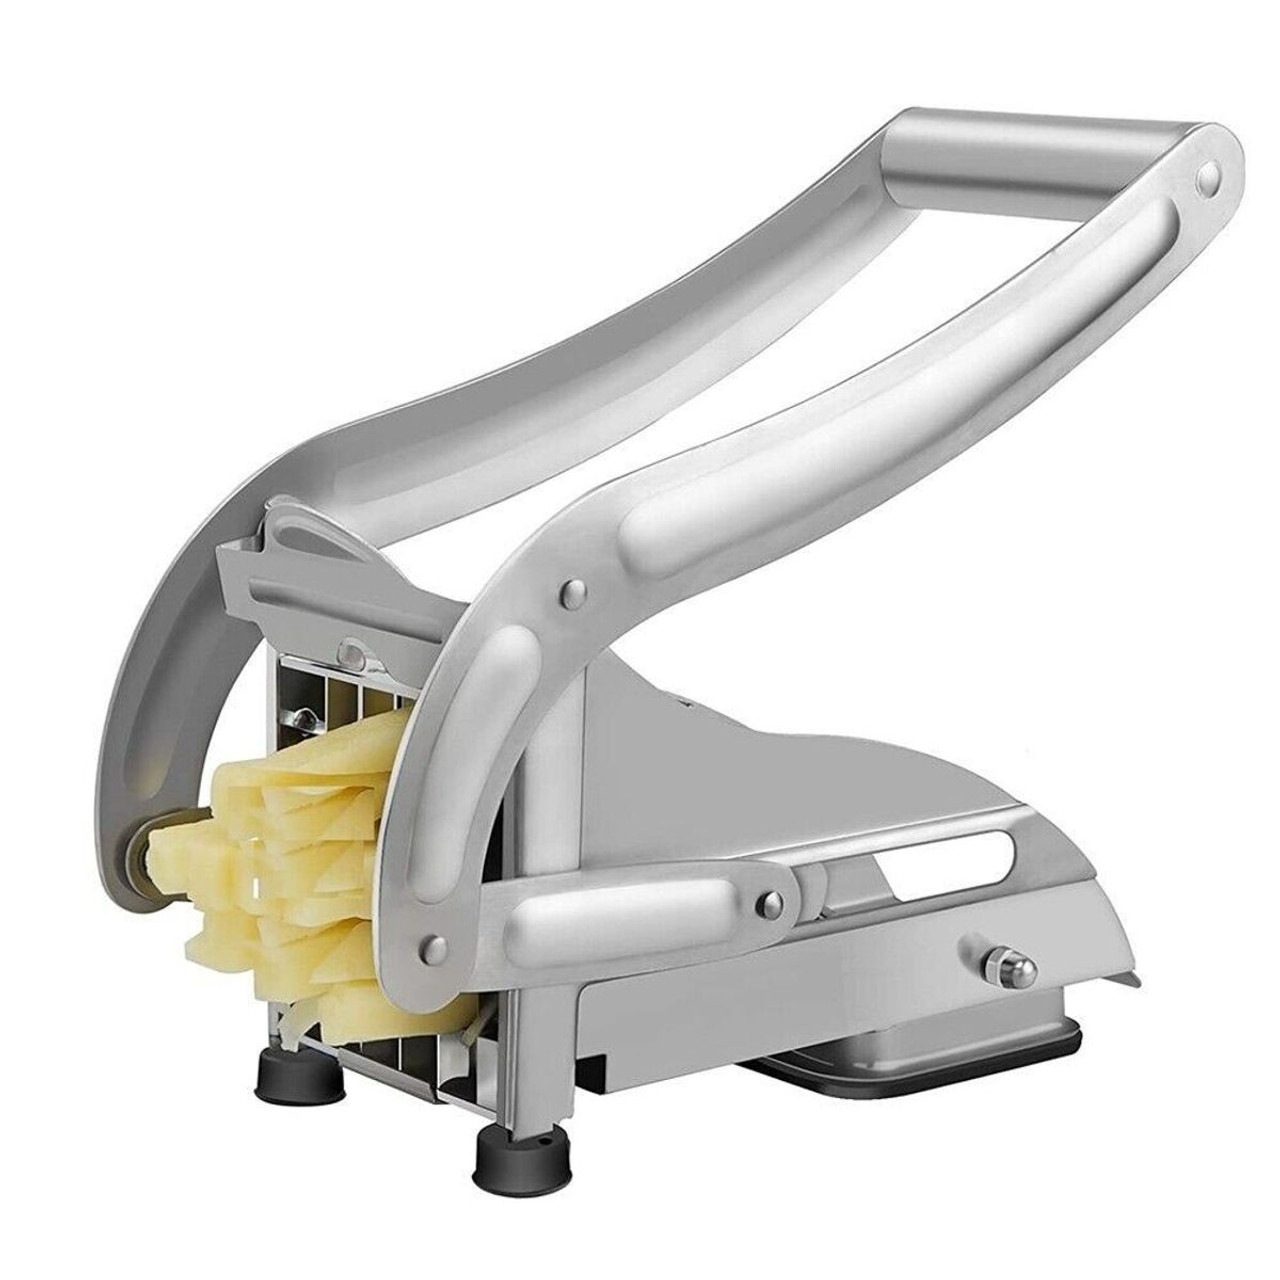 1 x RAW Customer Returns French Fry Cutter, Stainless Steel Potato